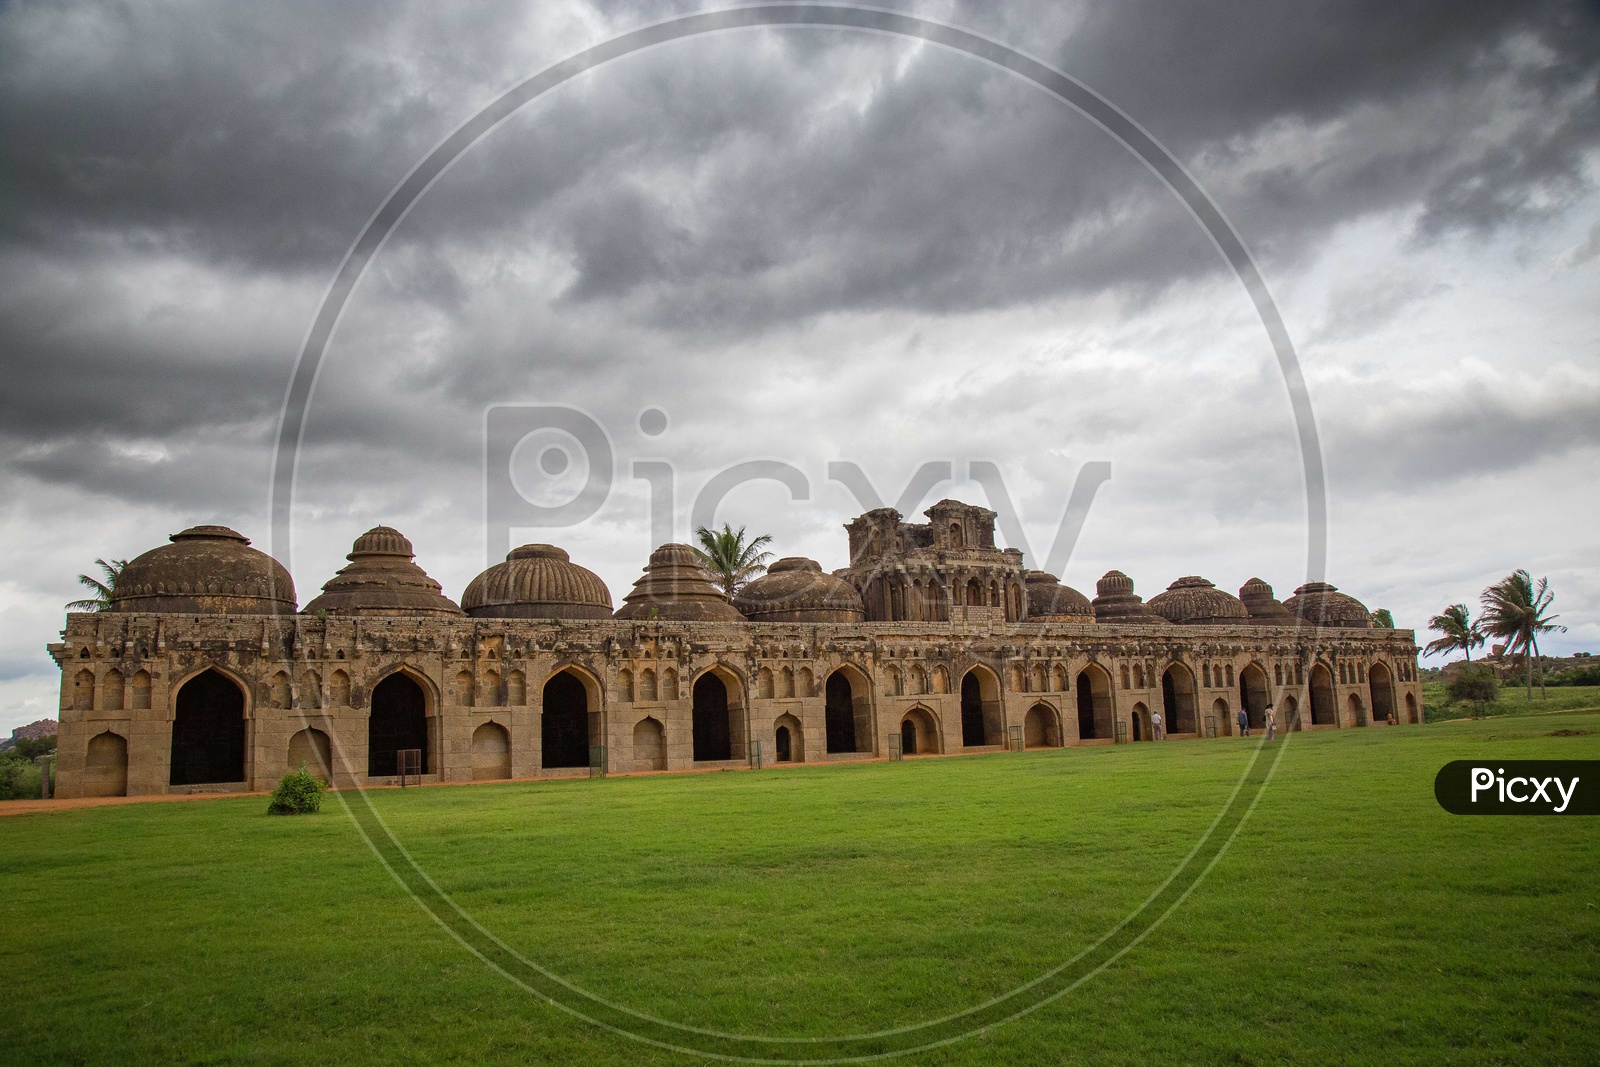 Elephant Stables in Hampi